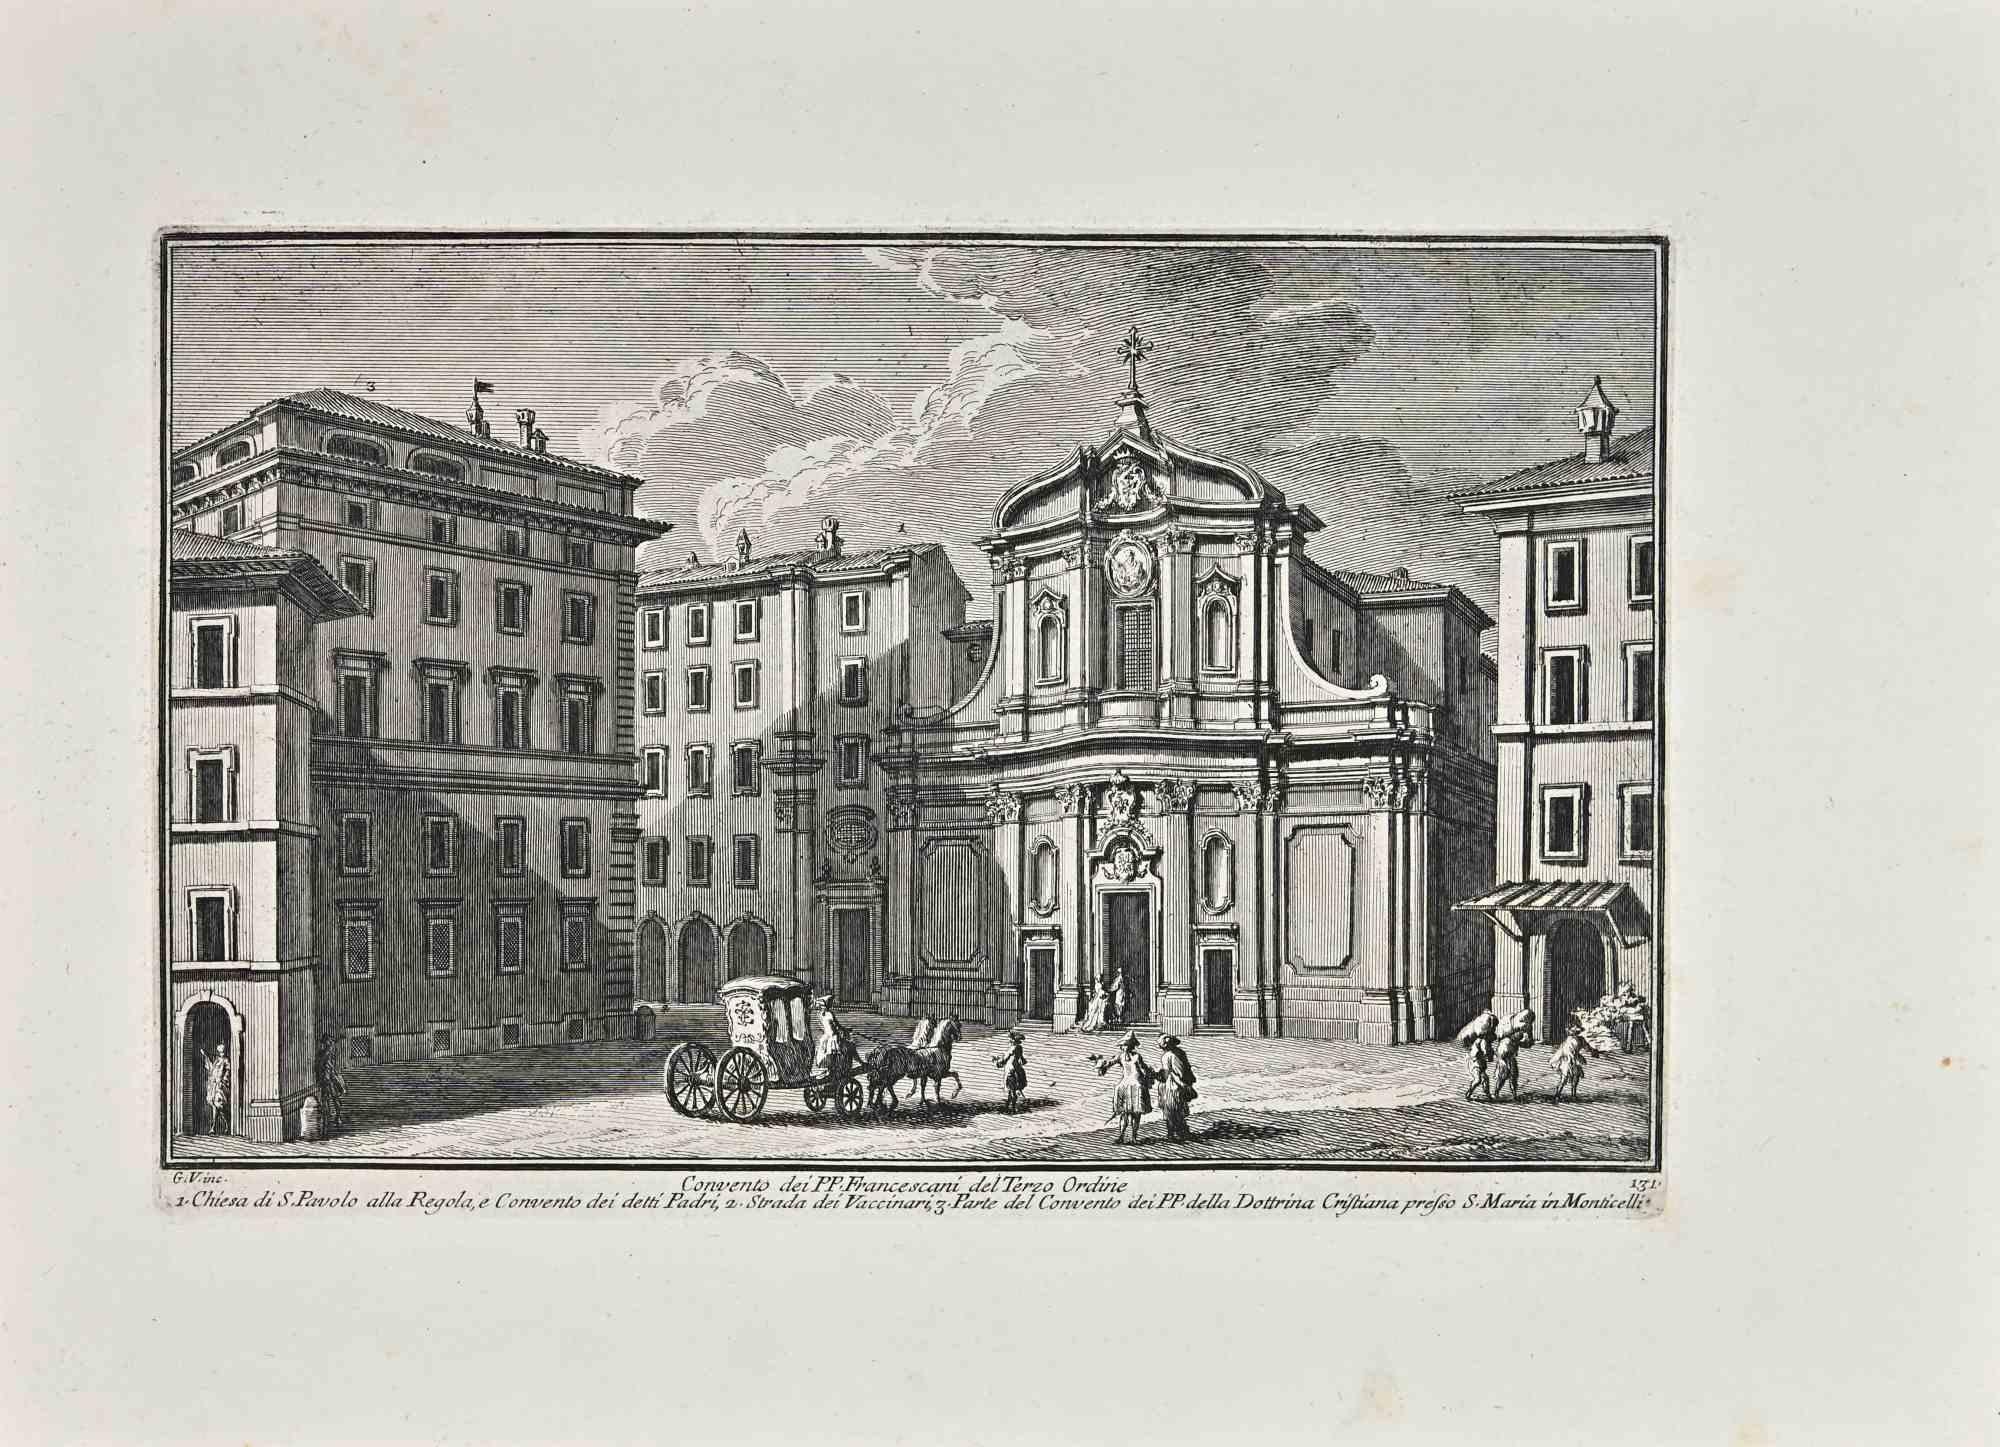 Convento di PP. Francescani del Terzo Ordine is an original etching of the Late 18th century realized by Giuseppe Vasi.

Signed and titled on plate lower margin. 

Good conditions.

Giuseppe Vasi  (Corleone,1710 - Rome, 1782) was an engraver,